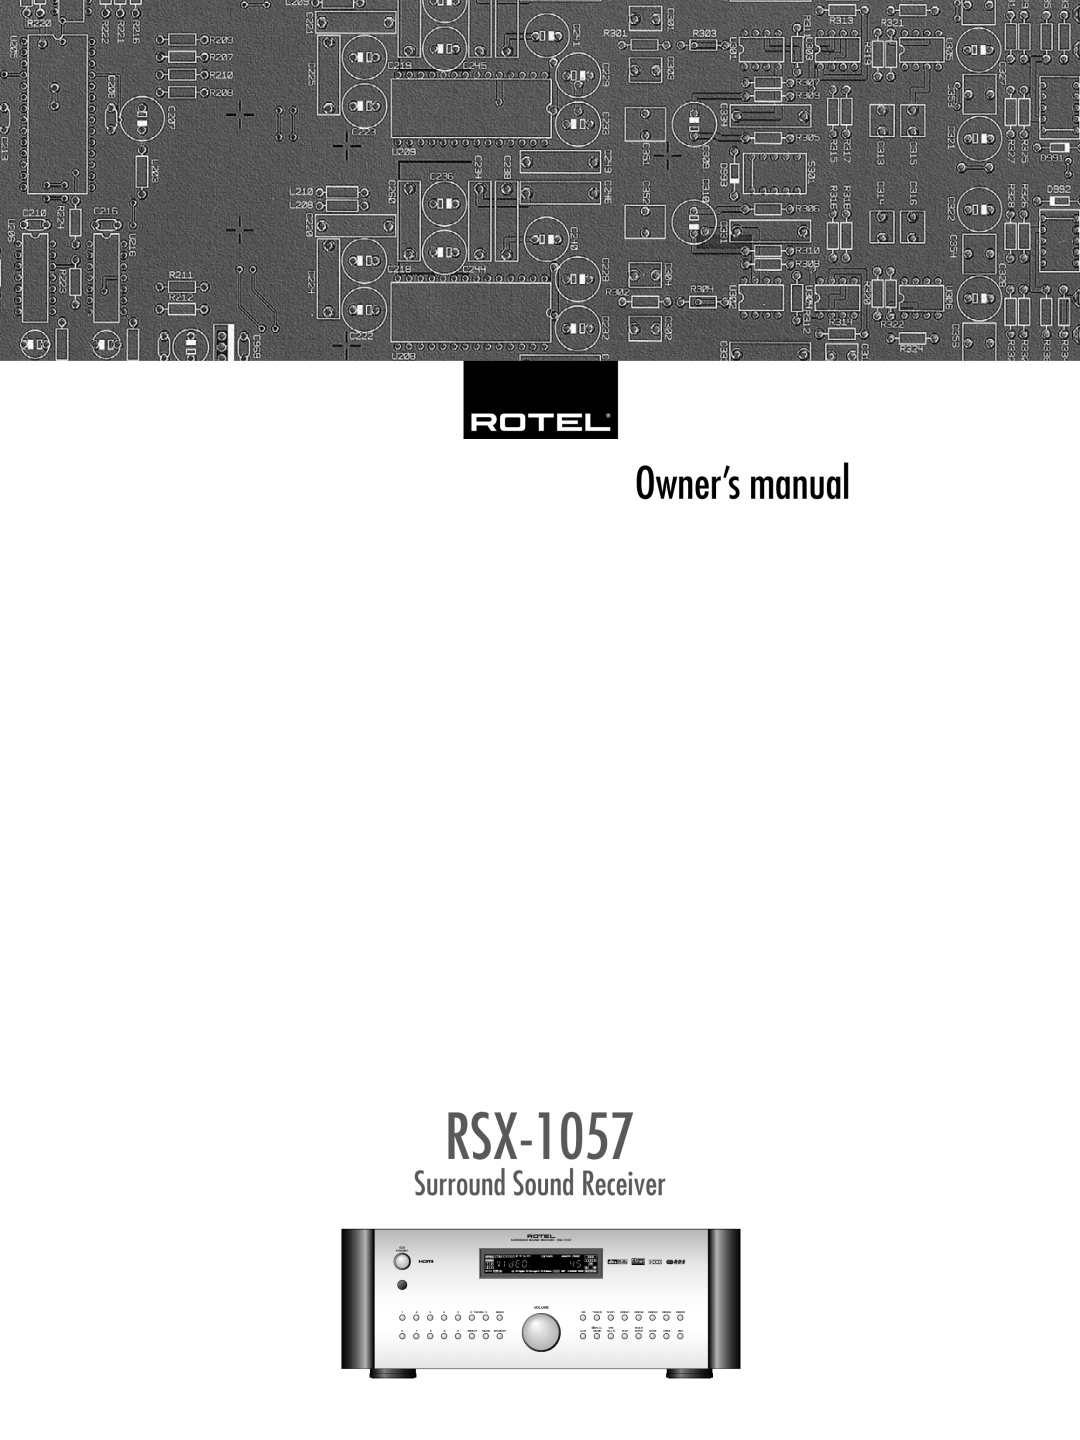 Rotel RSX-1057 owner manual Owner’s manual, Surround Sound Receiver 